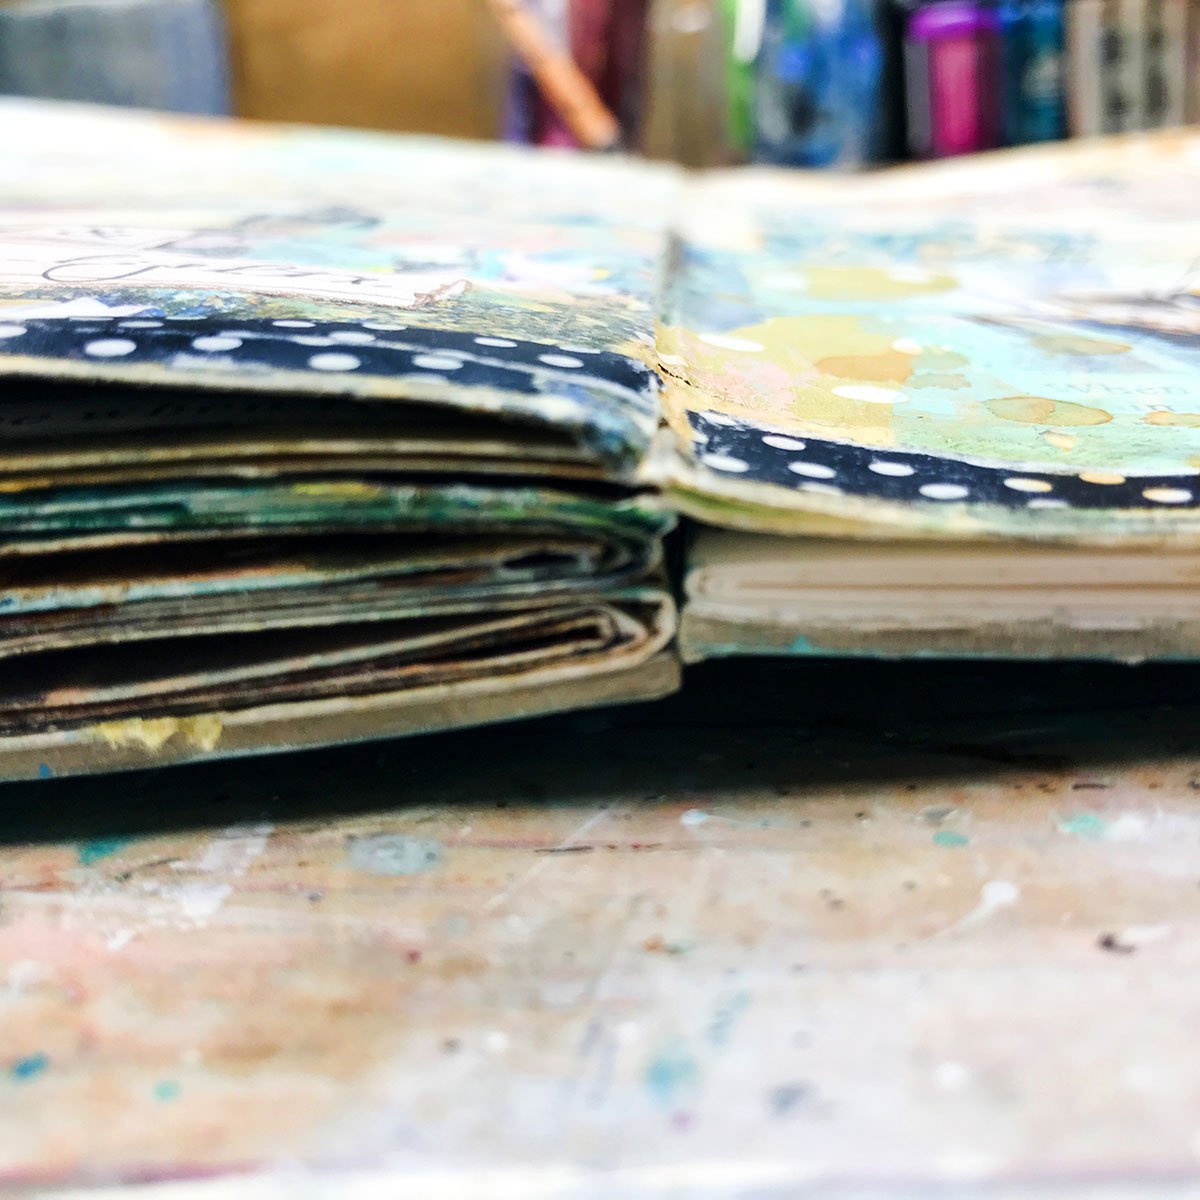 How to make an art journal — Laly Mille Mixed Media Art